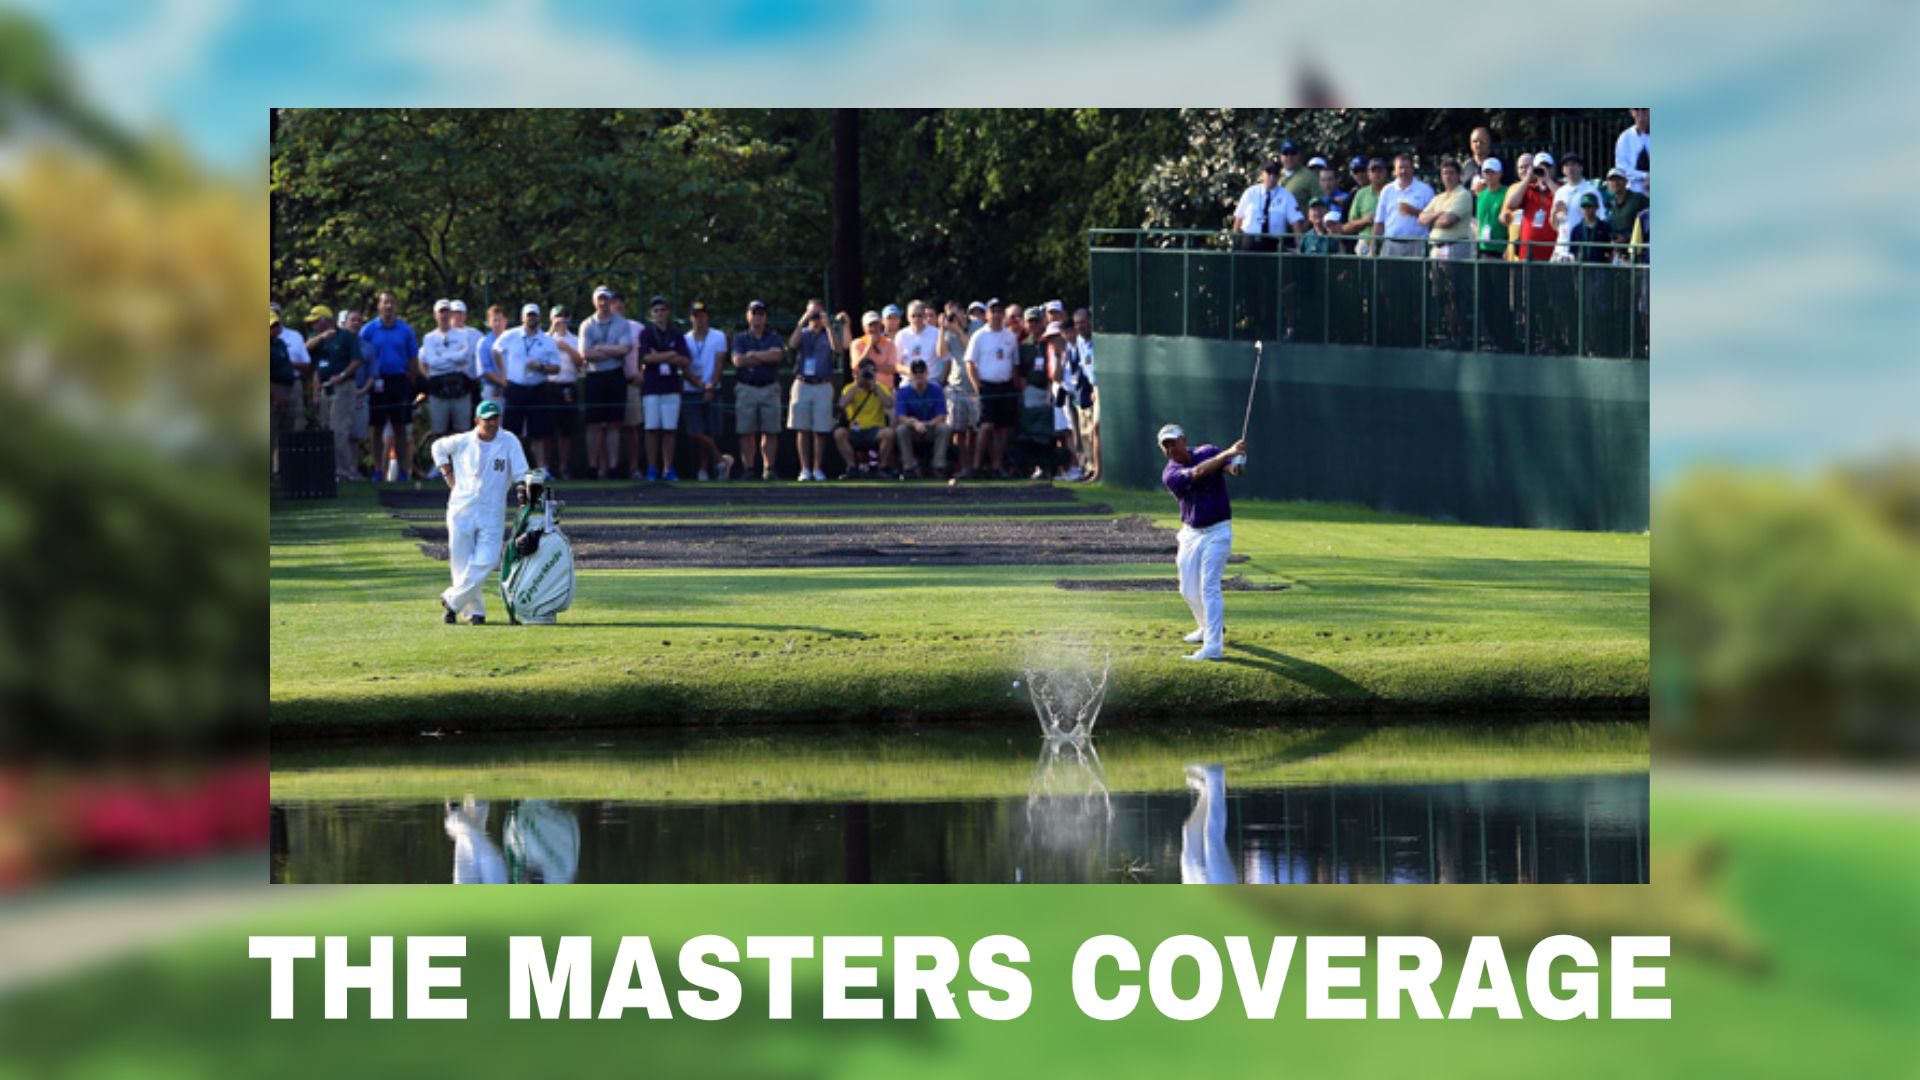 10 Notable Traditions of The Masters Tournament